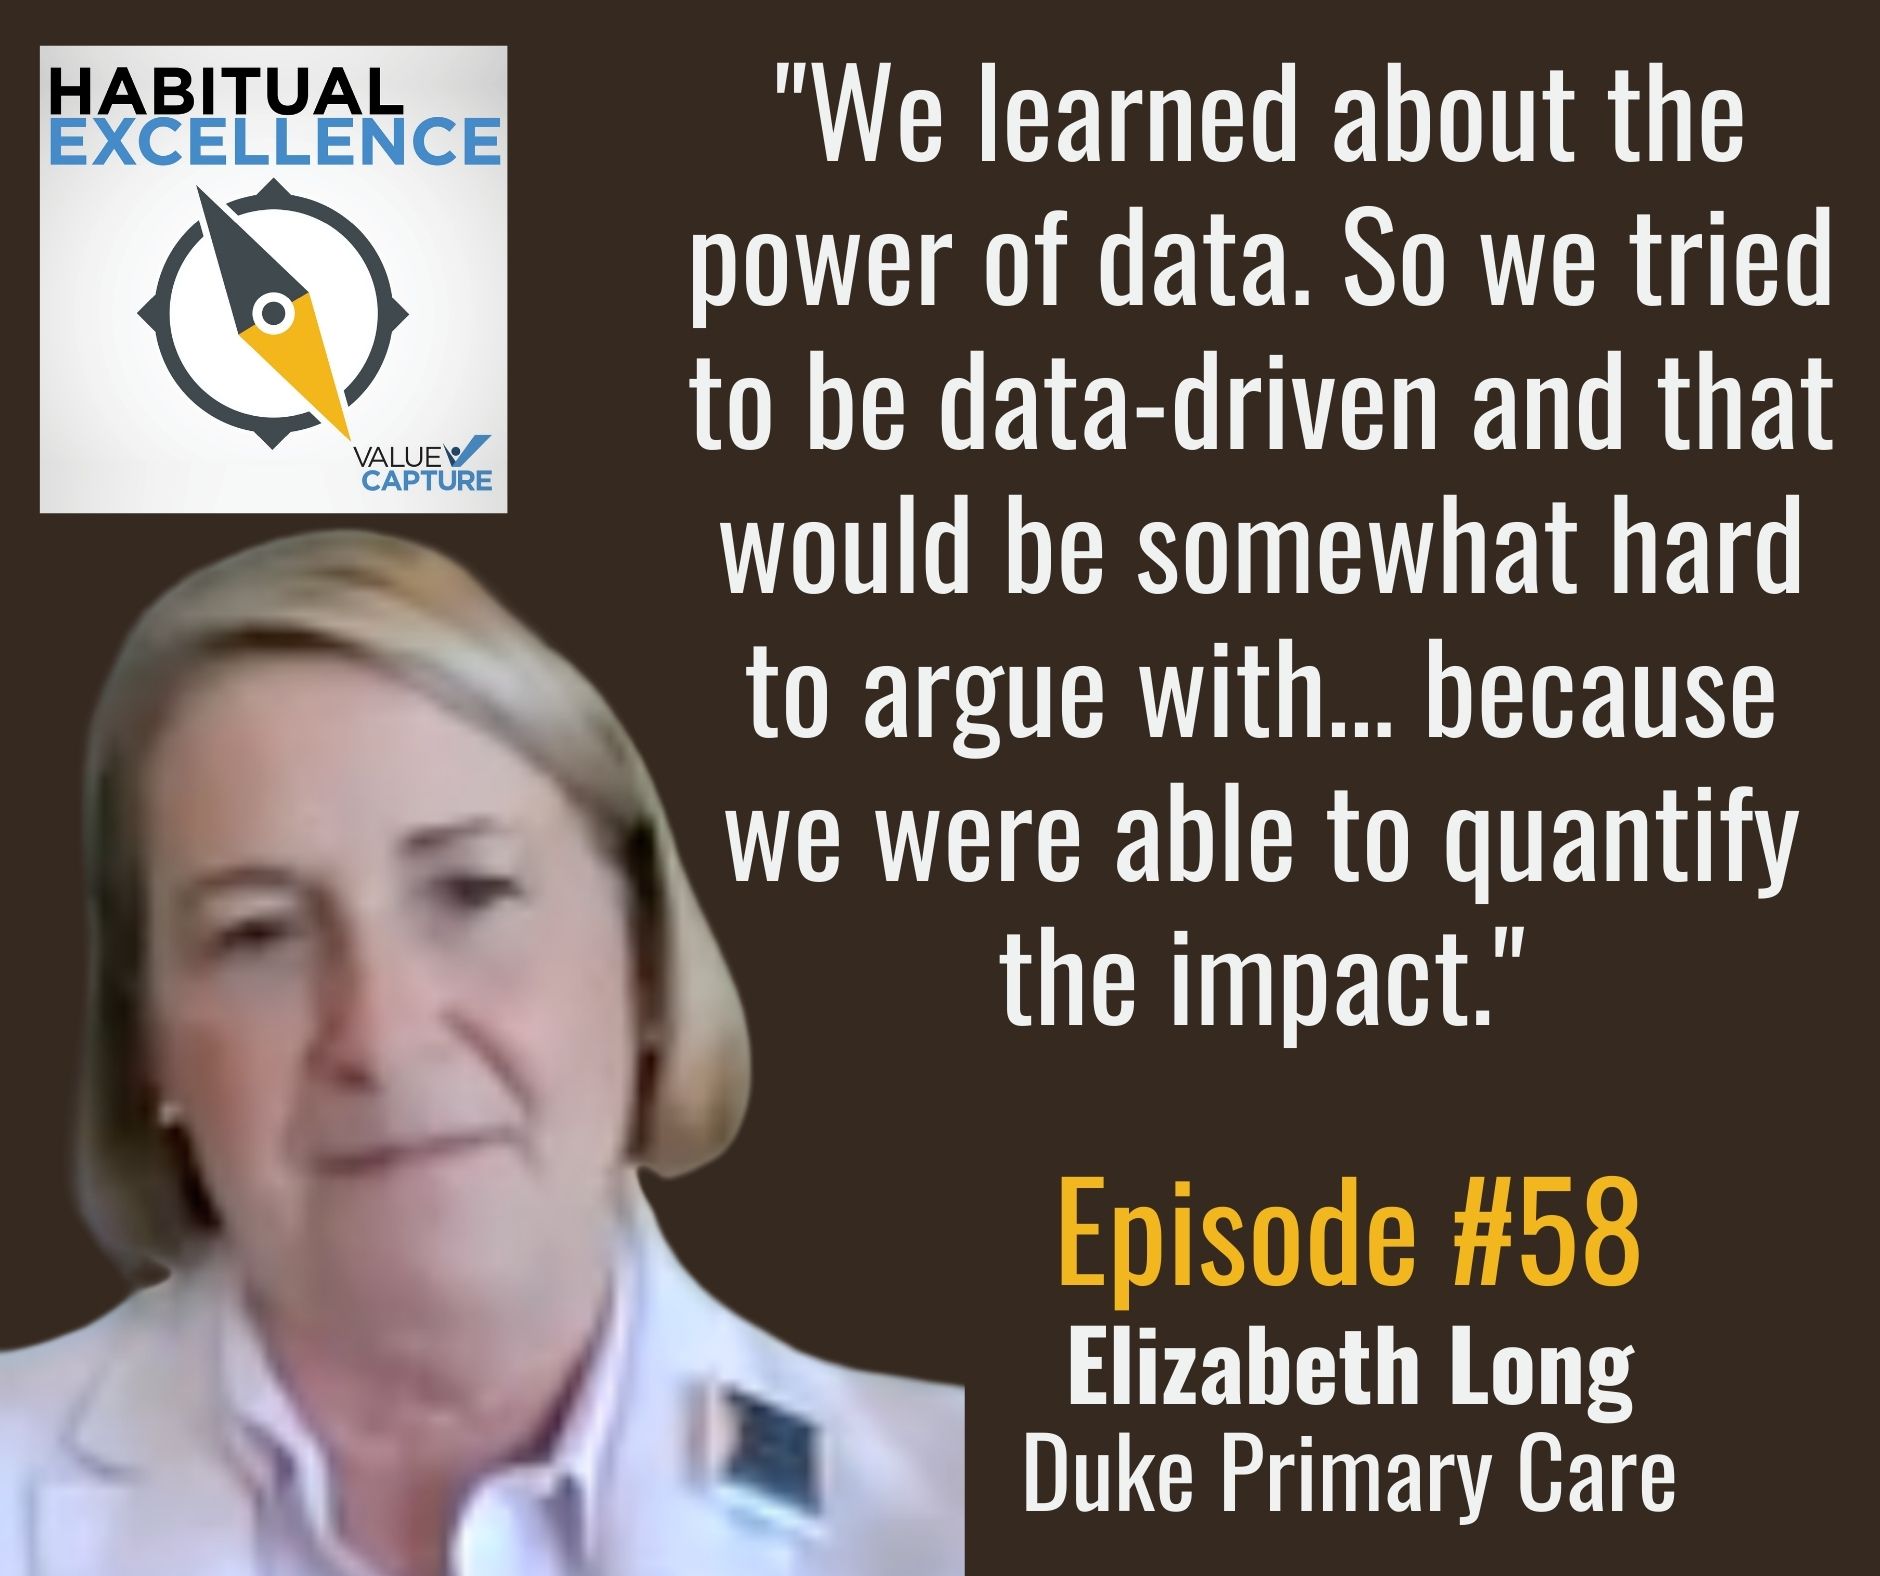 "We learned about the power of data. So we tried to be data-driven and that would be somewhat hard to argue with... because we were able to quantify the impact."